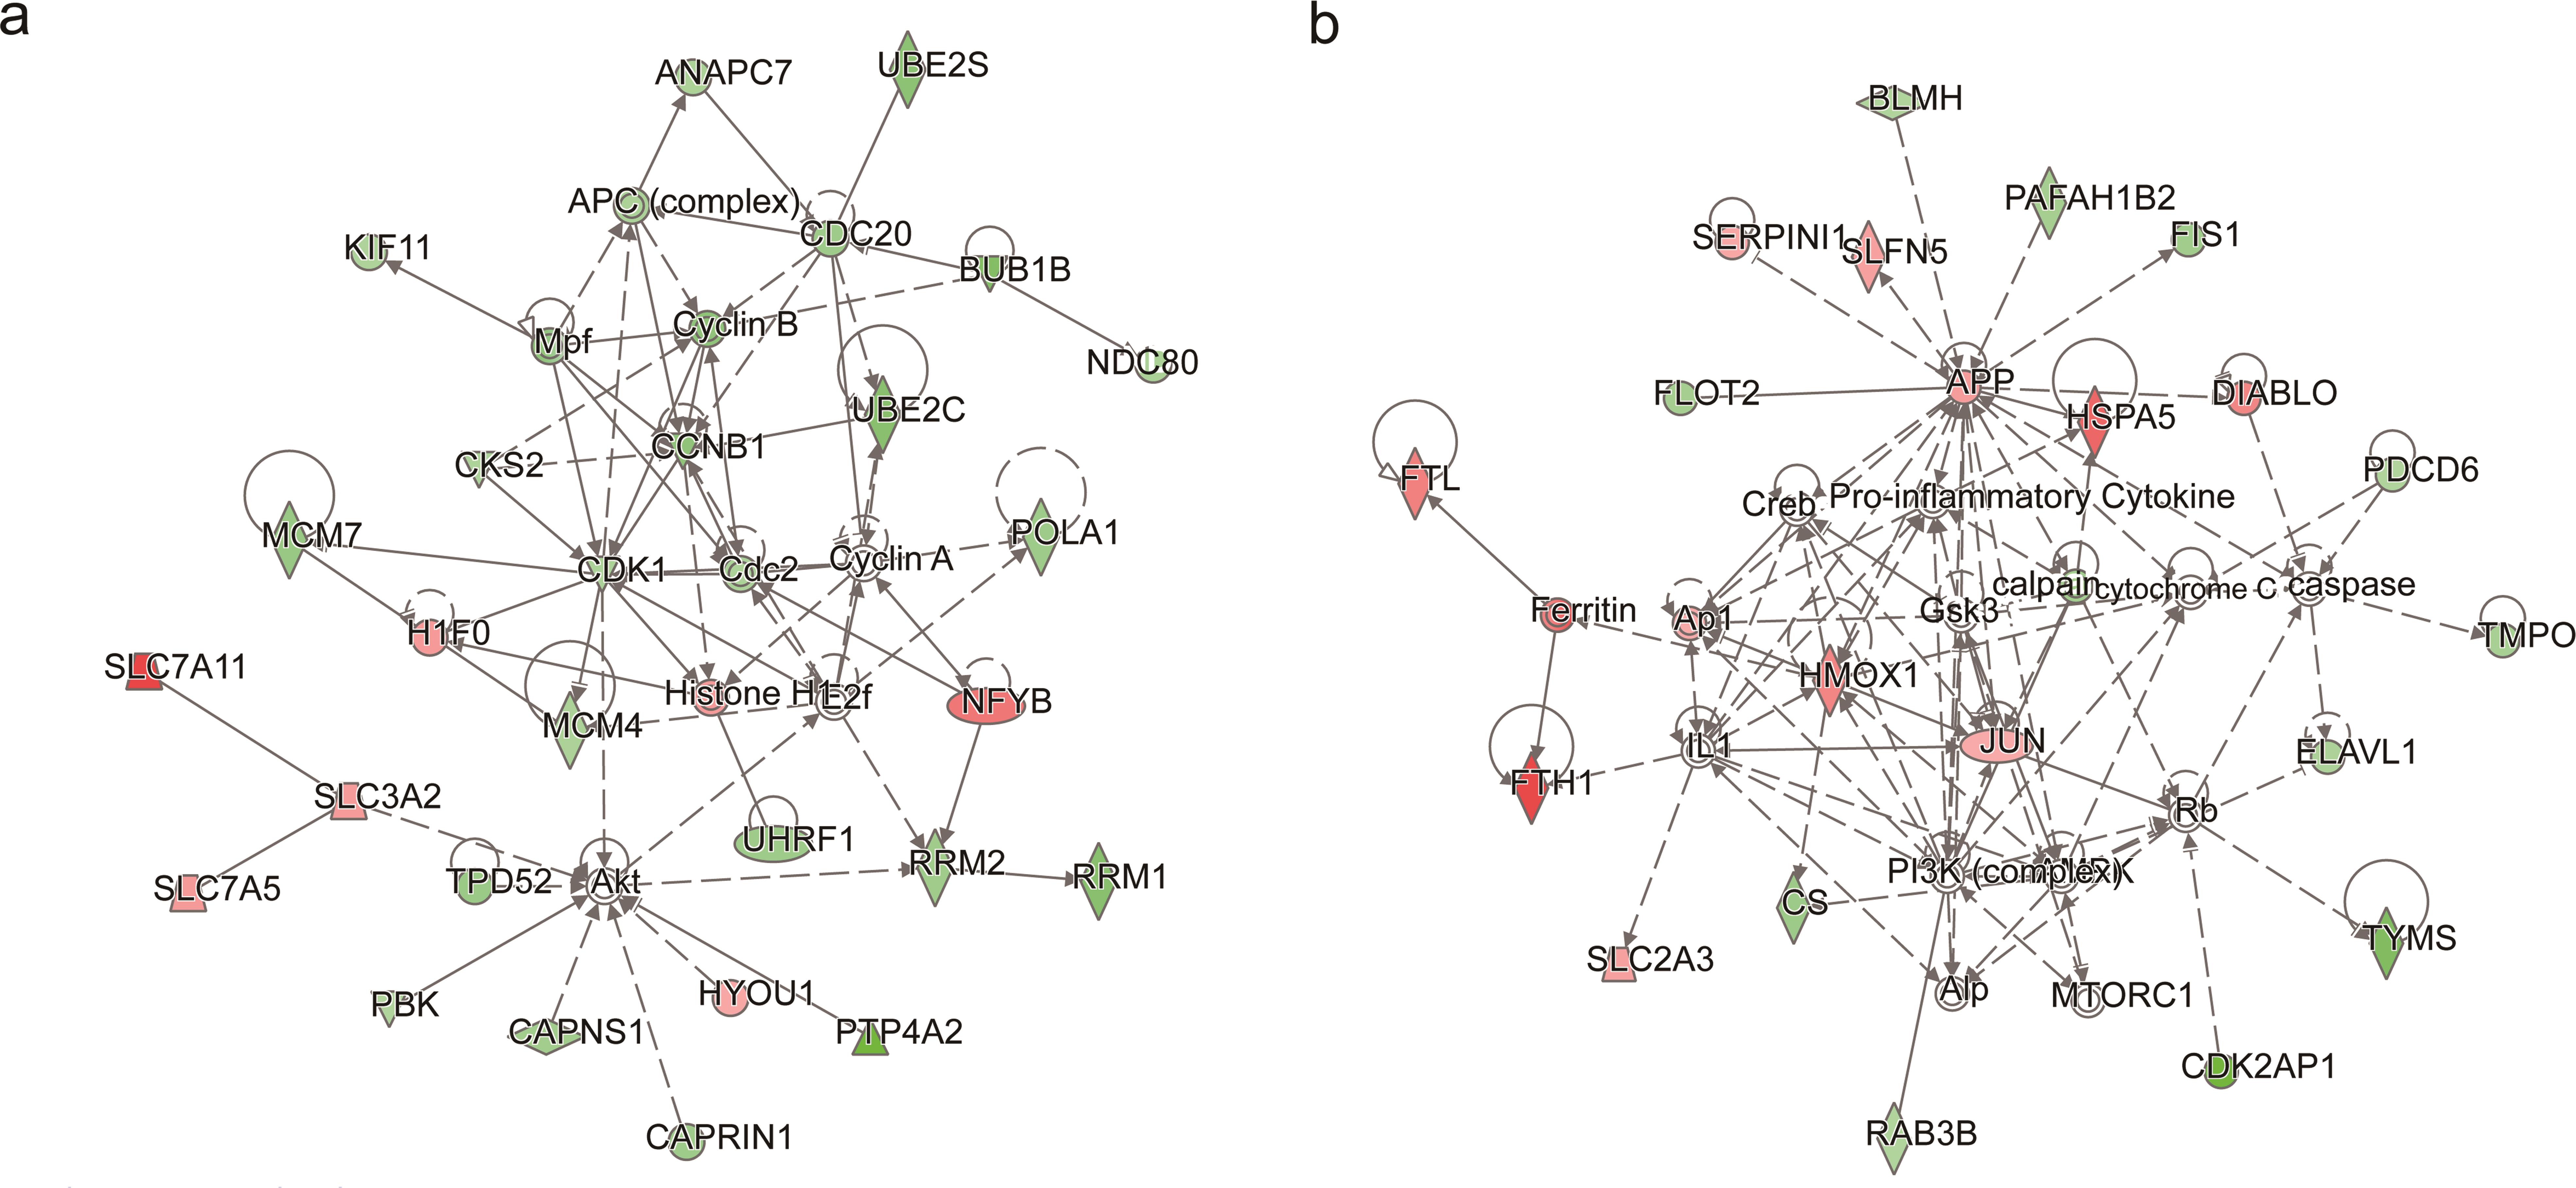 Network analysis of the SNH-regulated proteins: (a) SNH-regulated functional network was associated with the cell cycle, DNA replication, recombination and repair; and (b) SNH-regulated functional network was associated with post-translational modification, protein degradation and molecular transport.